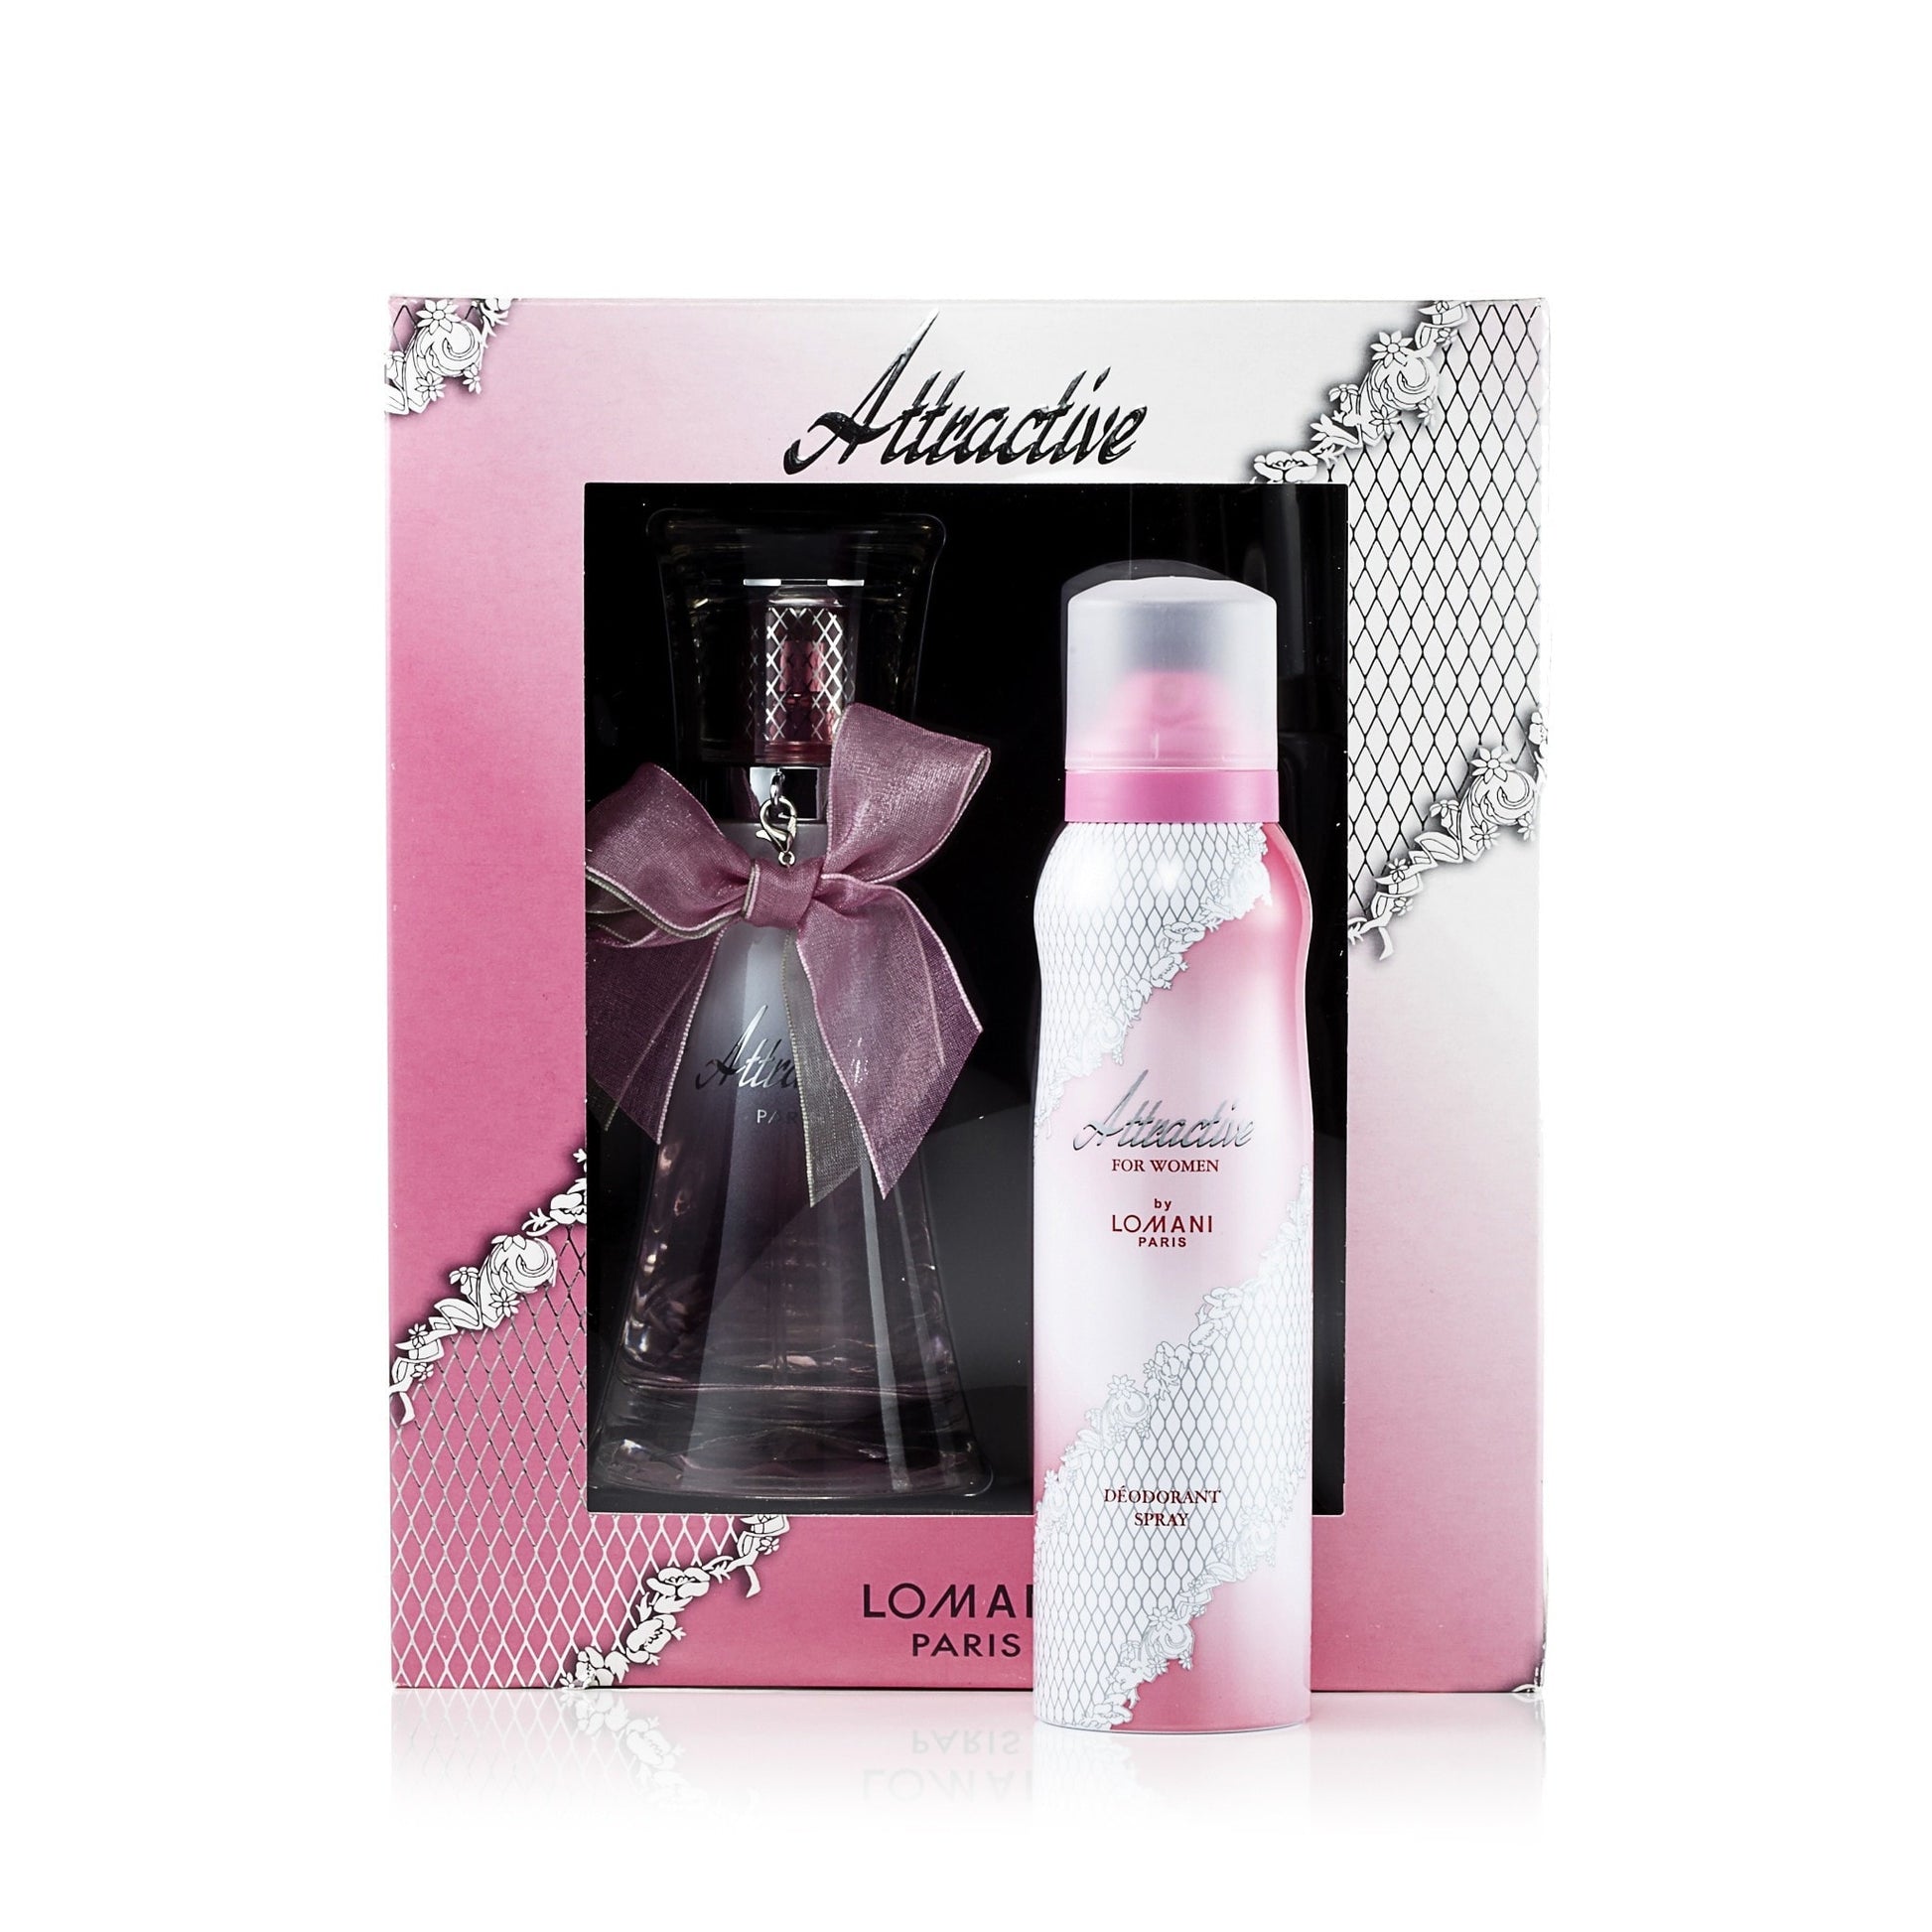 Attractive Gift Set for Women 3.4 oz. Click to open in modal